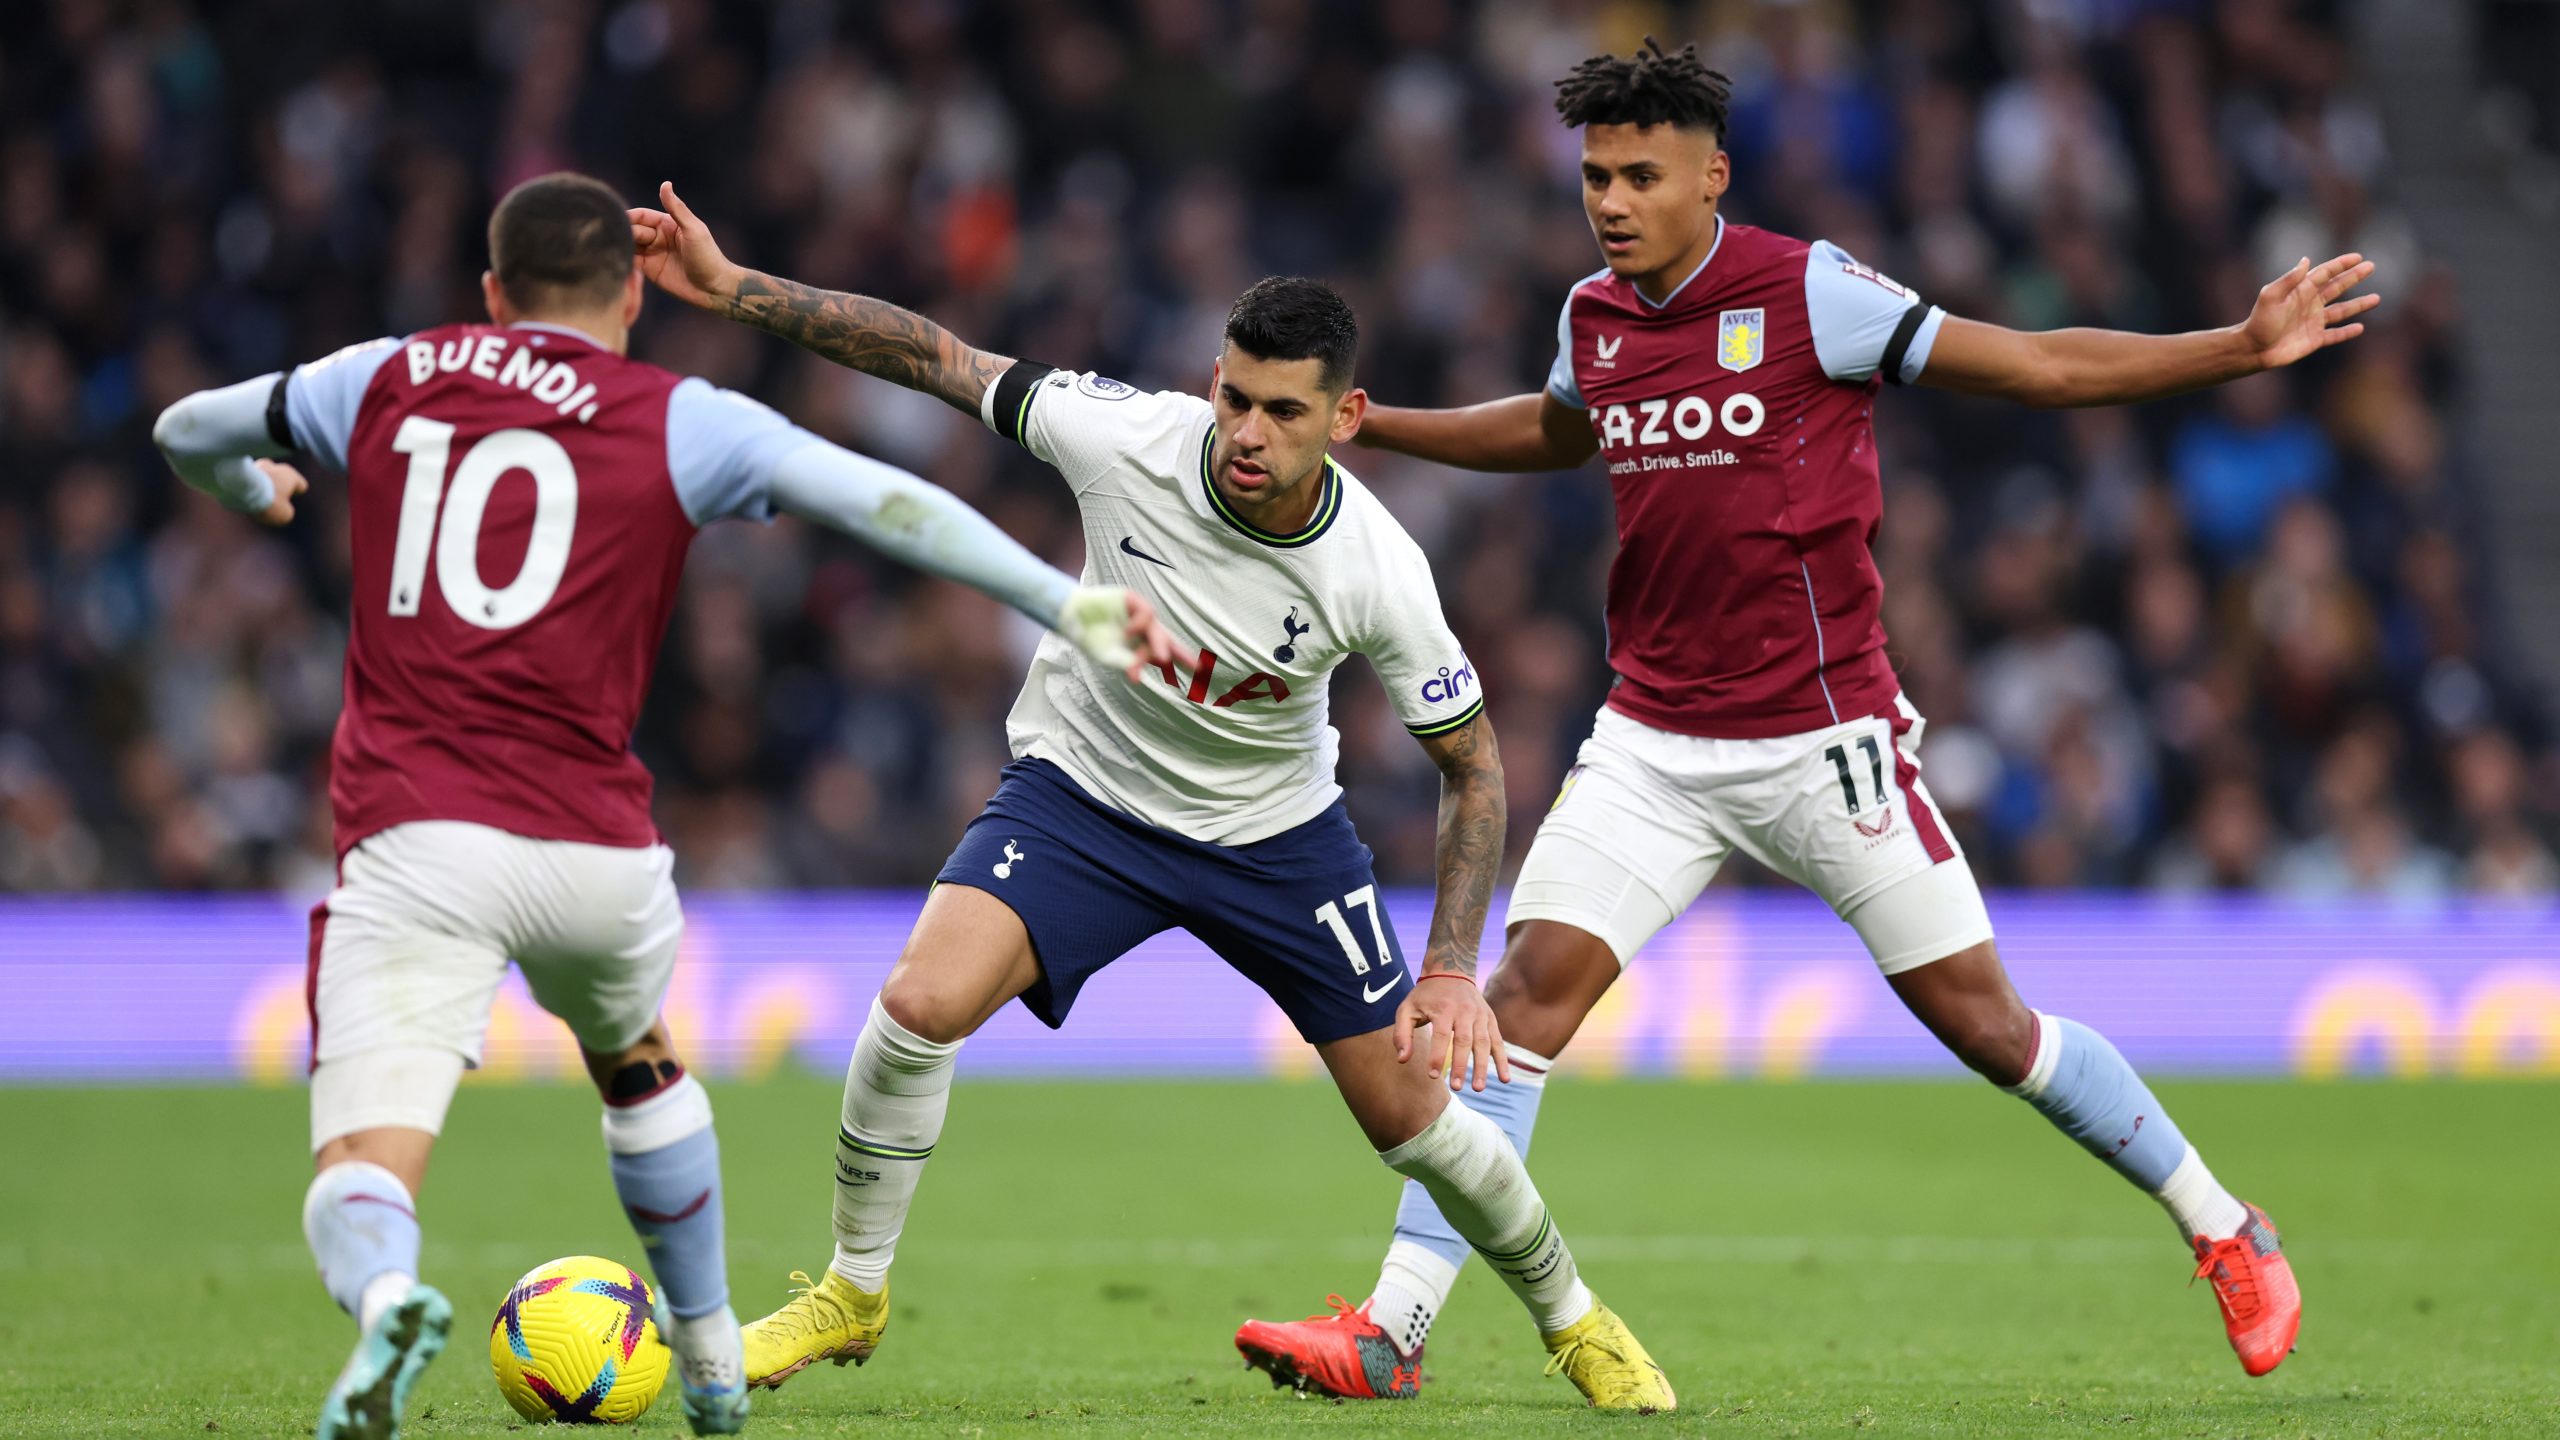 aston-villa-vs-tottenham-live-stream-and-how-to-watch-the-premier-league-clash-for-free-online-and-on-tv,-team-news